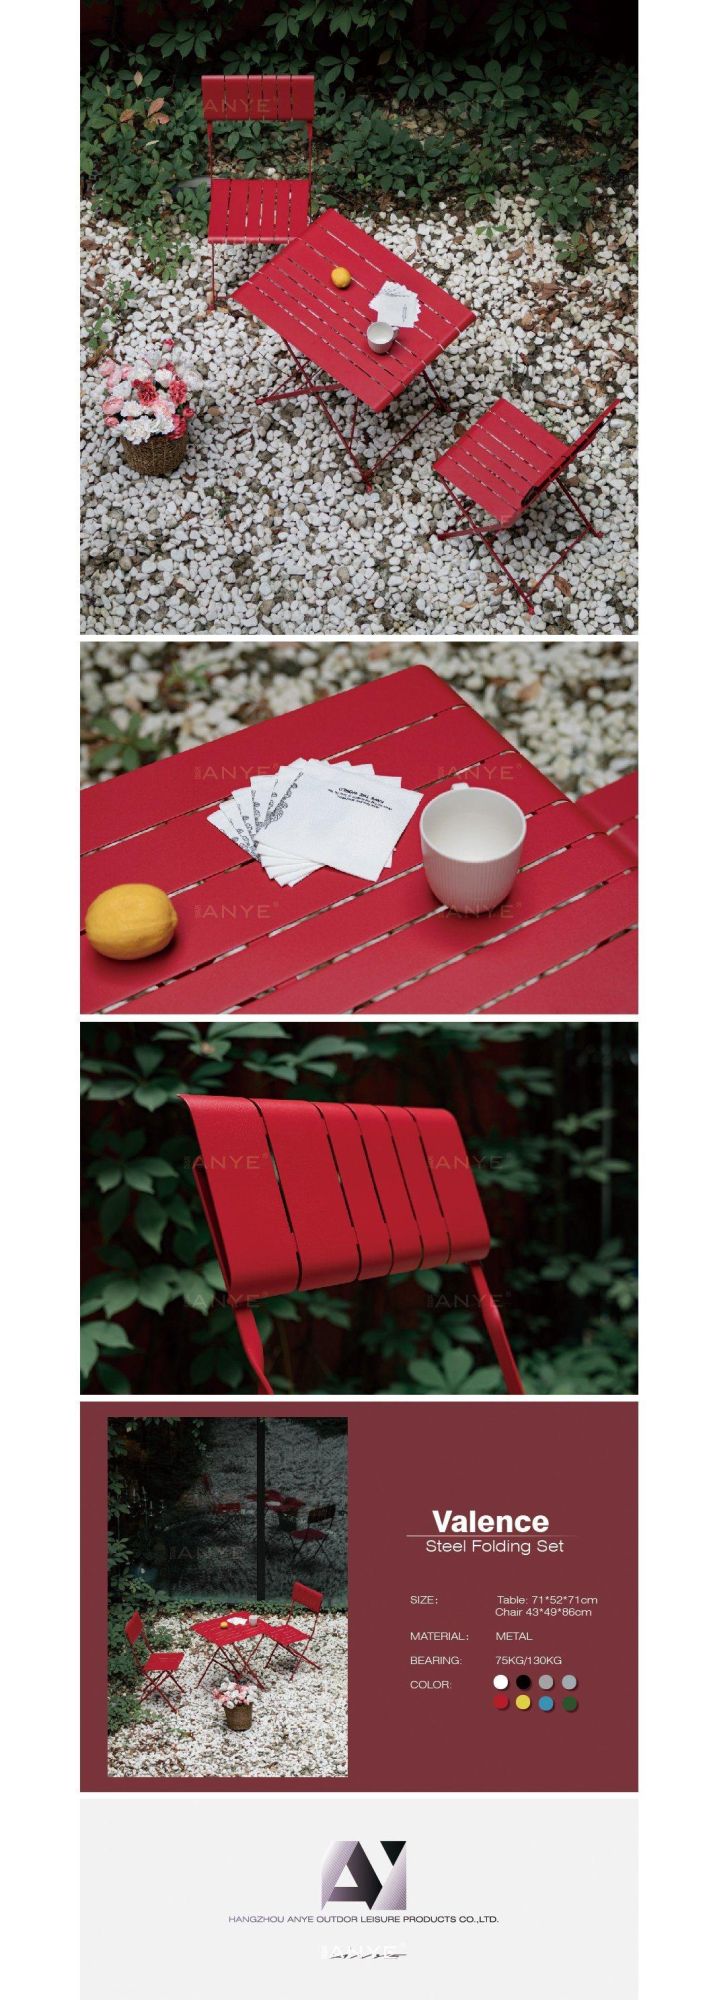 Backyard Furniture All Weather Resistant Folding Table Dining Chair Outdoor Furniture